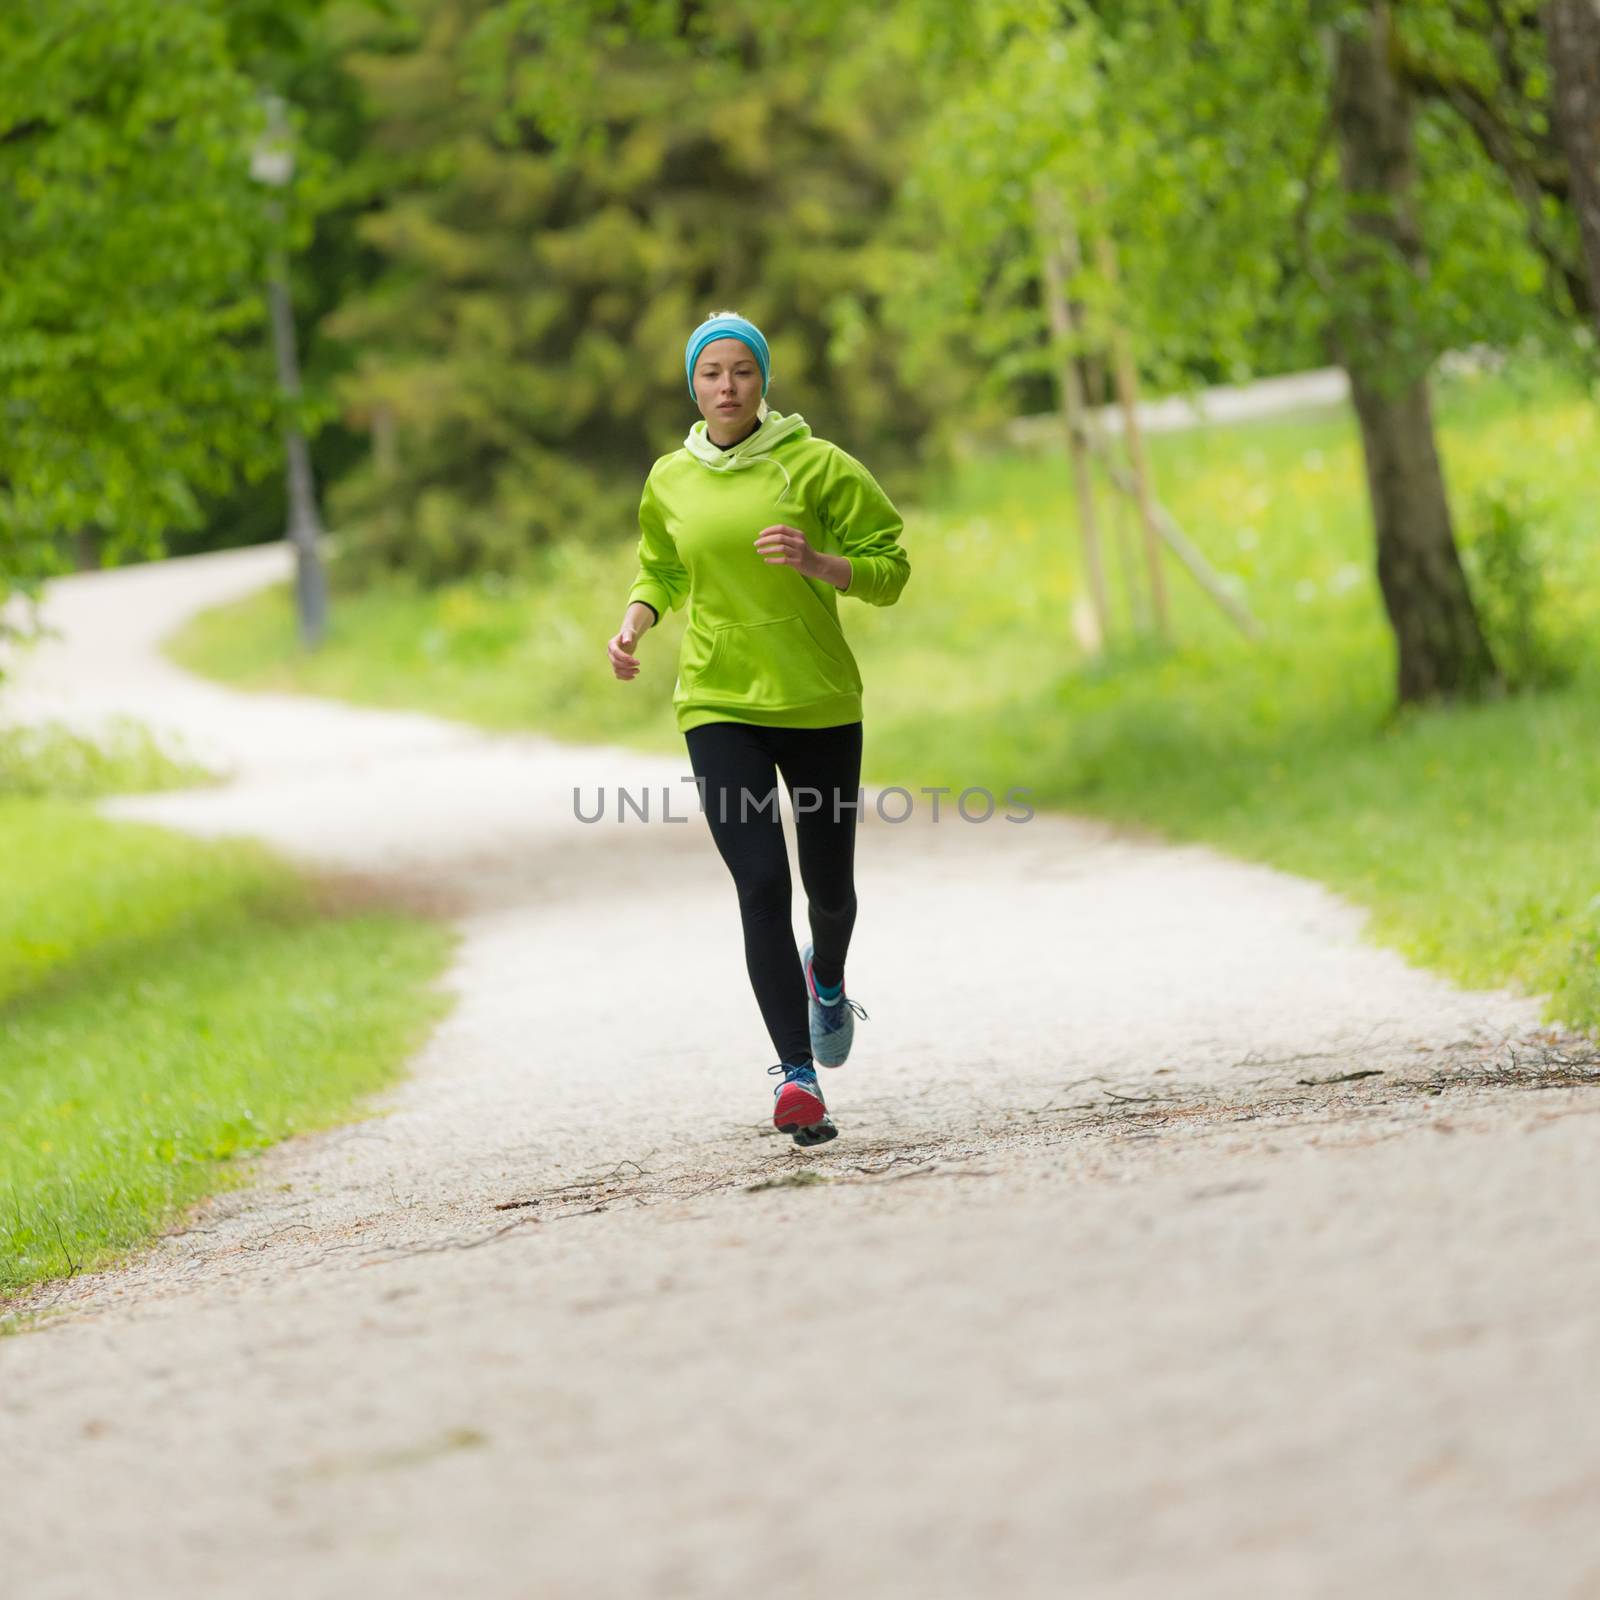 Sporty young female runner in city park. Running woman. Female runner during outdoor workout in nature. Fitness model outdoors. Weight Loss. Healthy lifestyle.